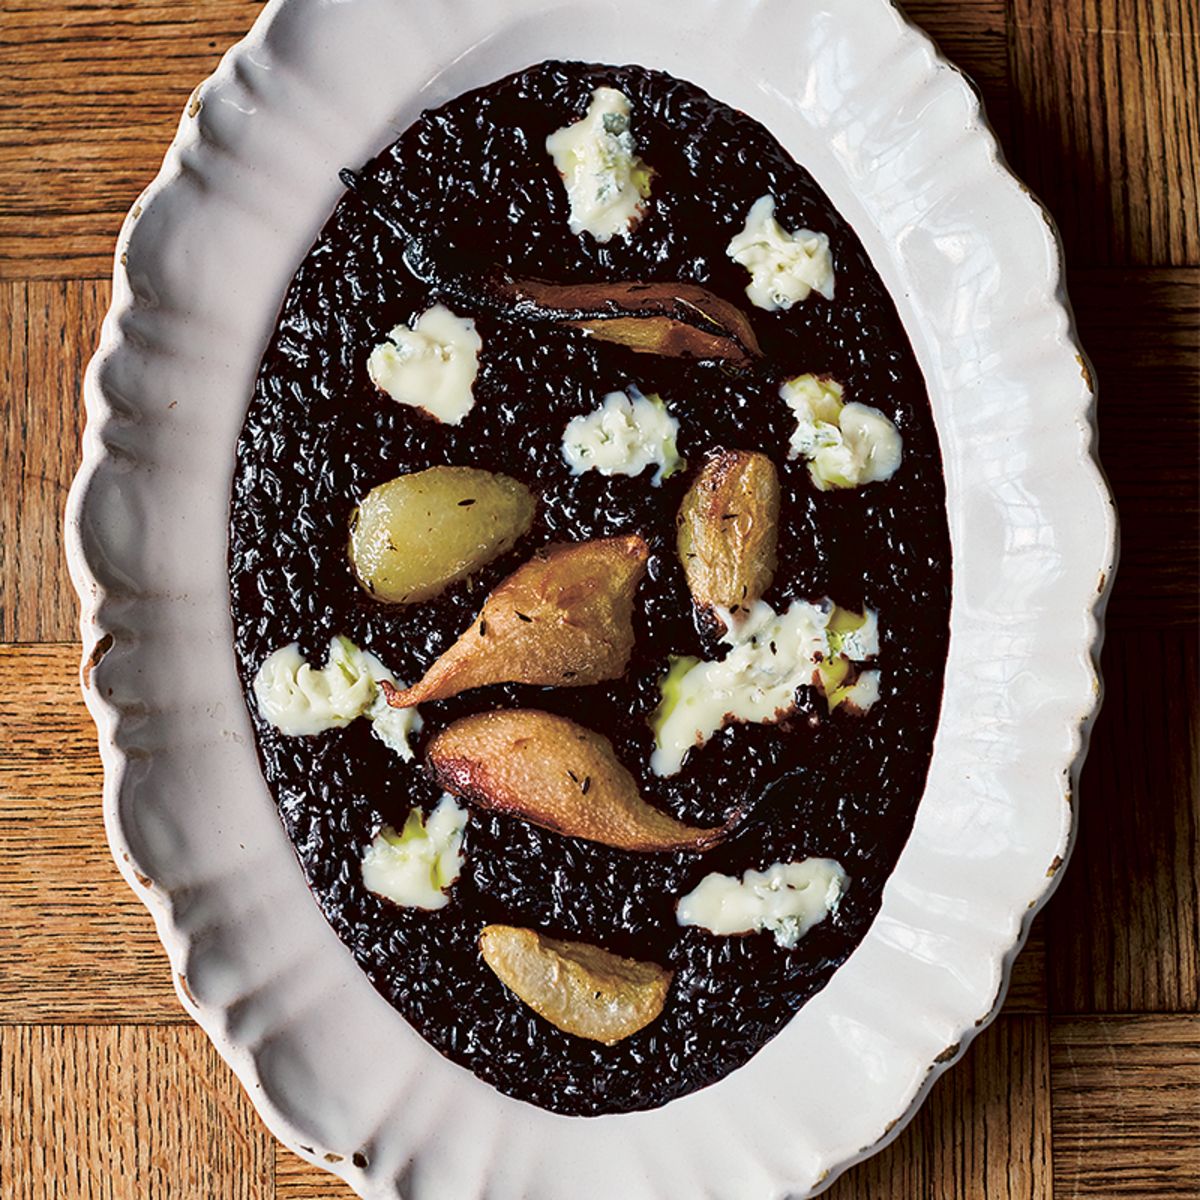 Jamie Oliver’s Oozy Black Rice with Sweet Roasted Pears, Thyme and Gorgonzola